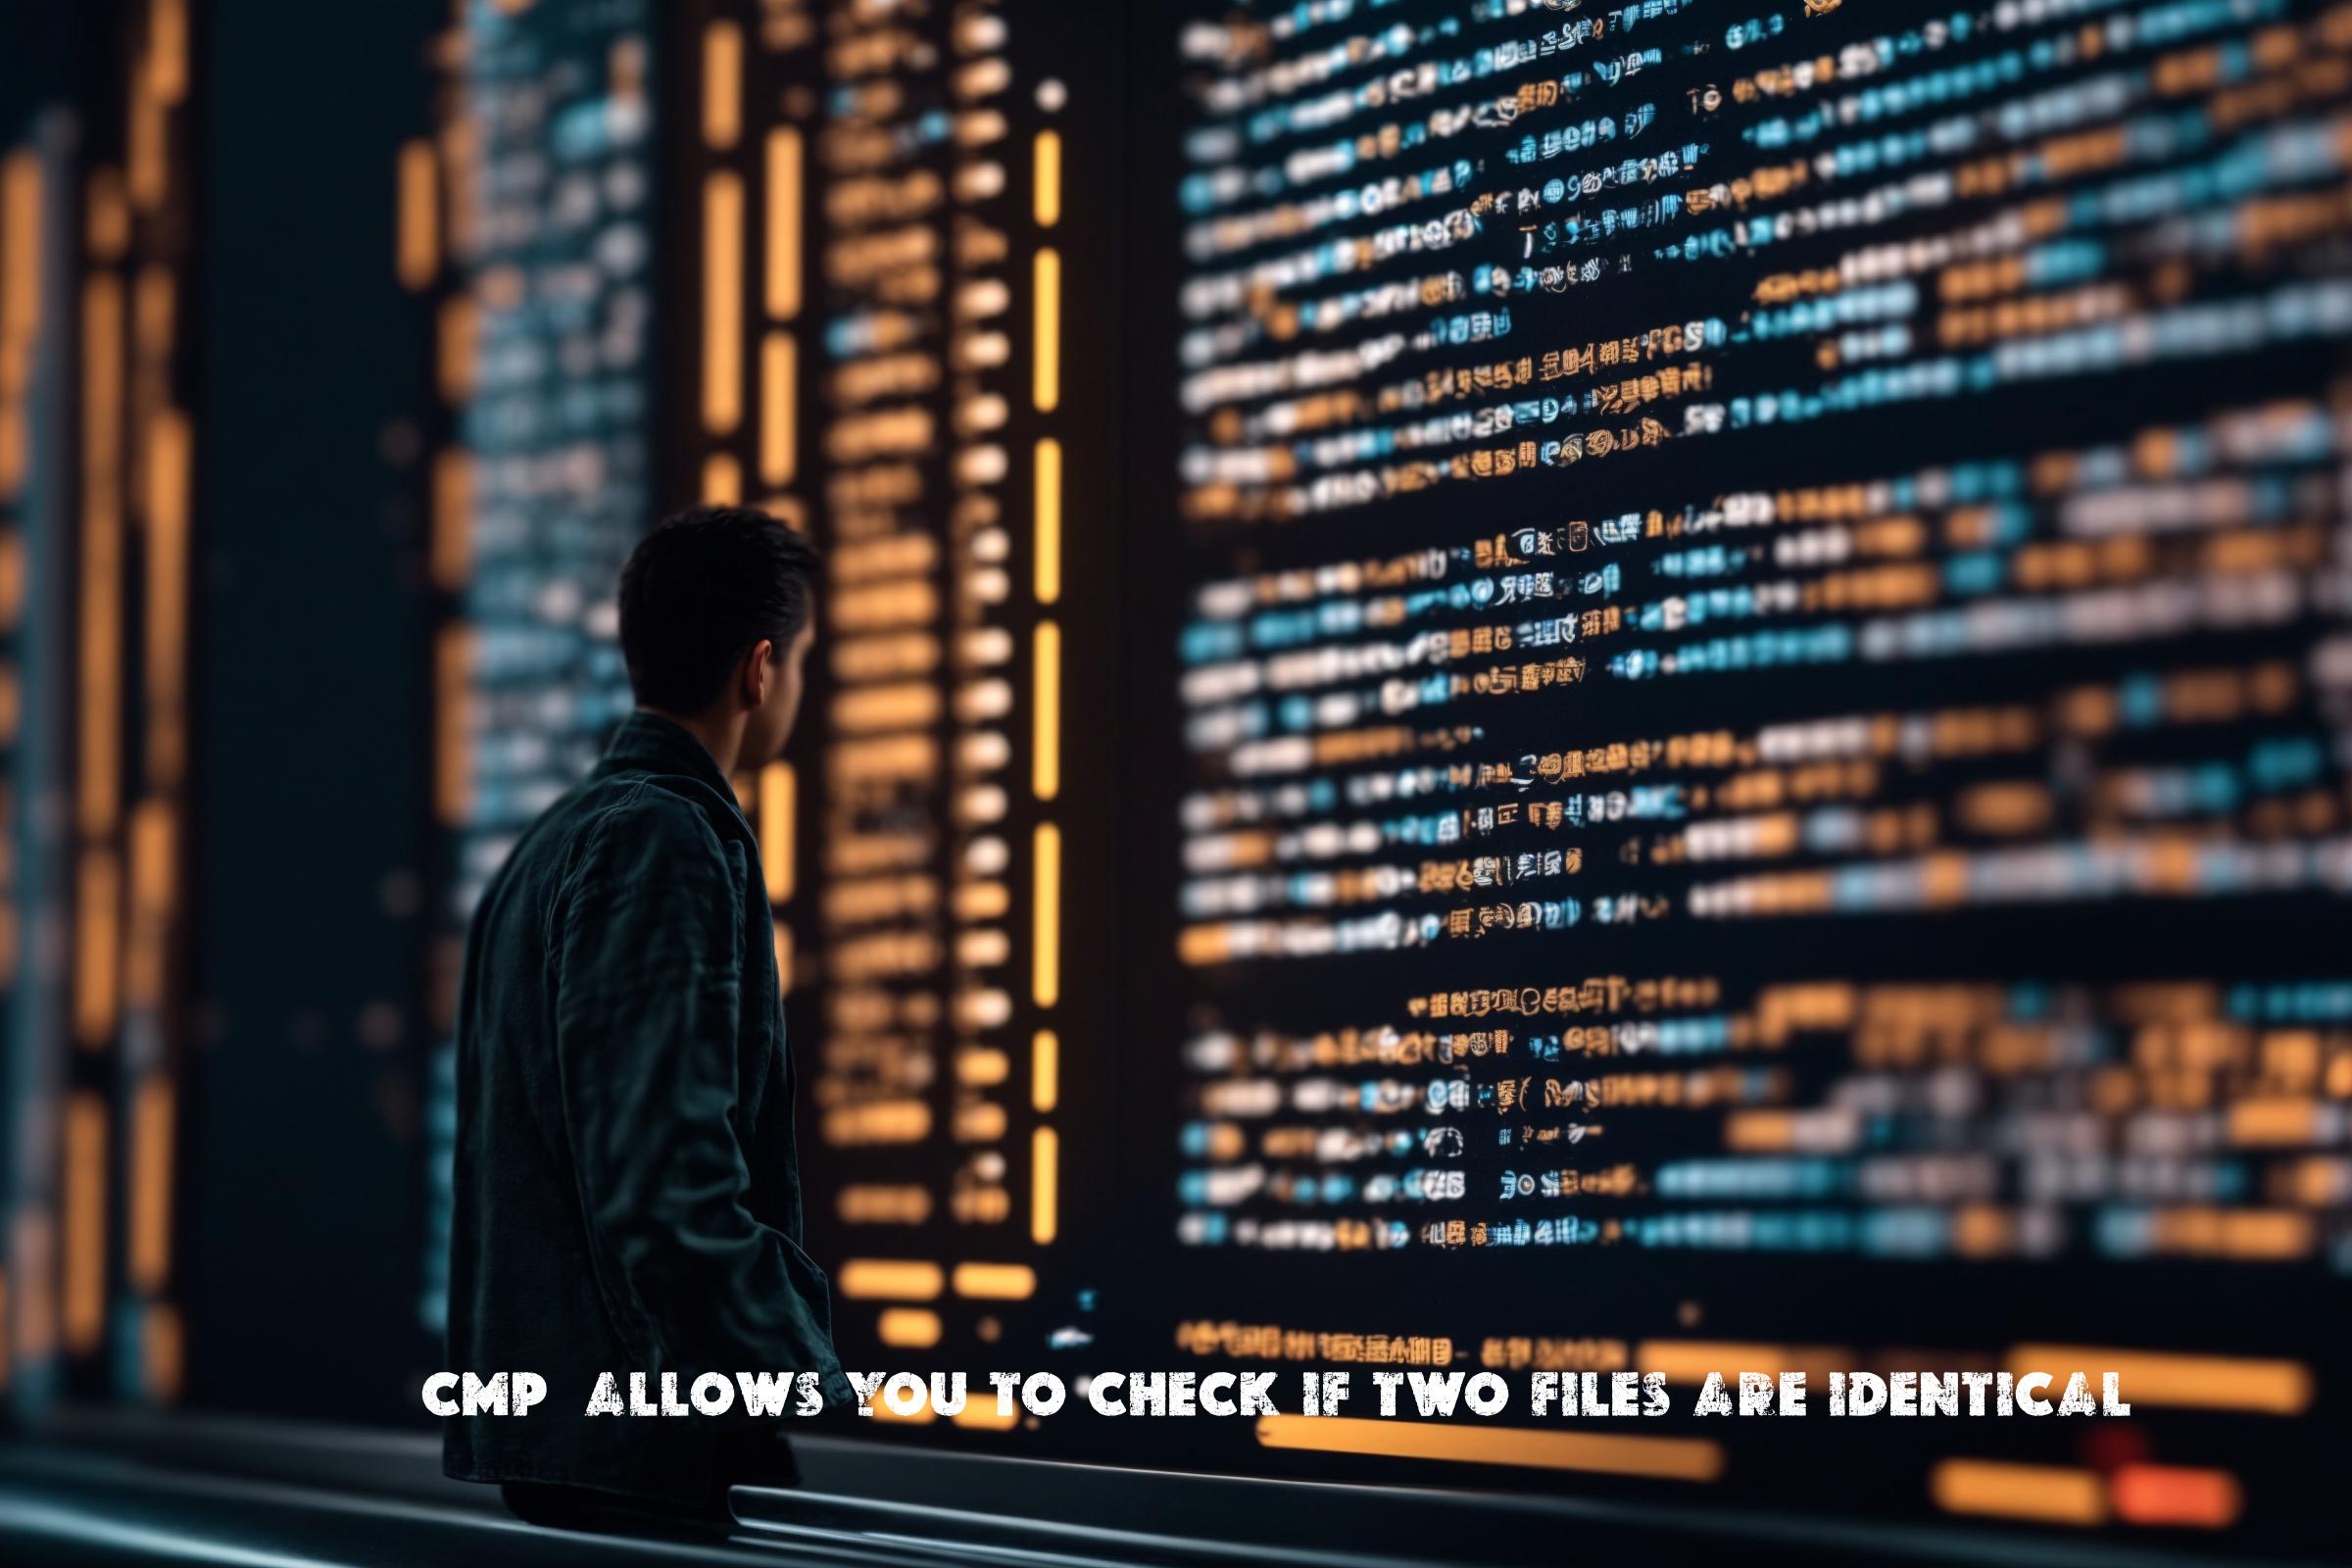 Introduction to cmp: Check if two files are identical